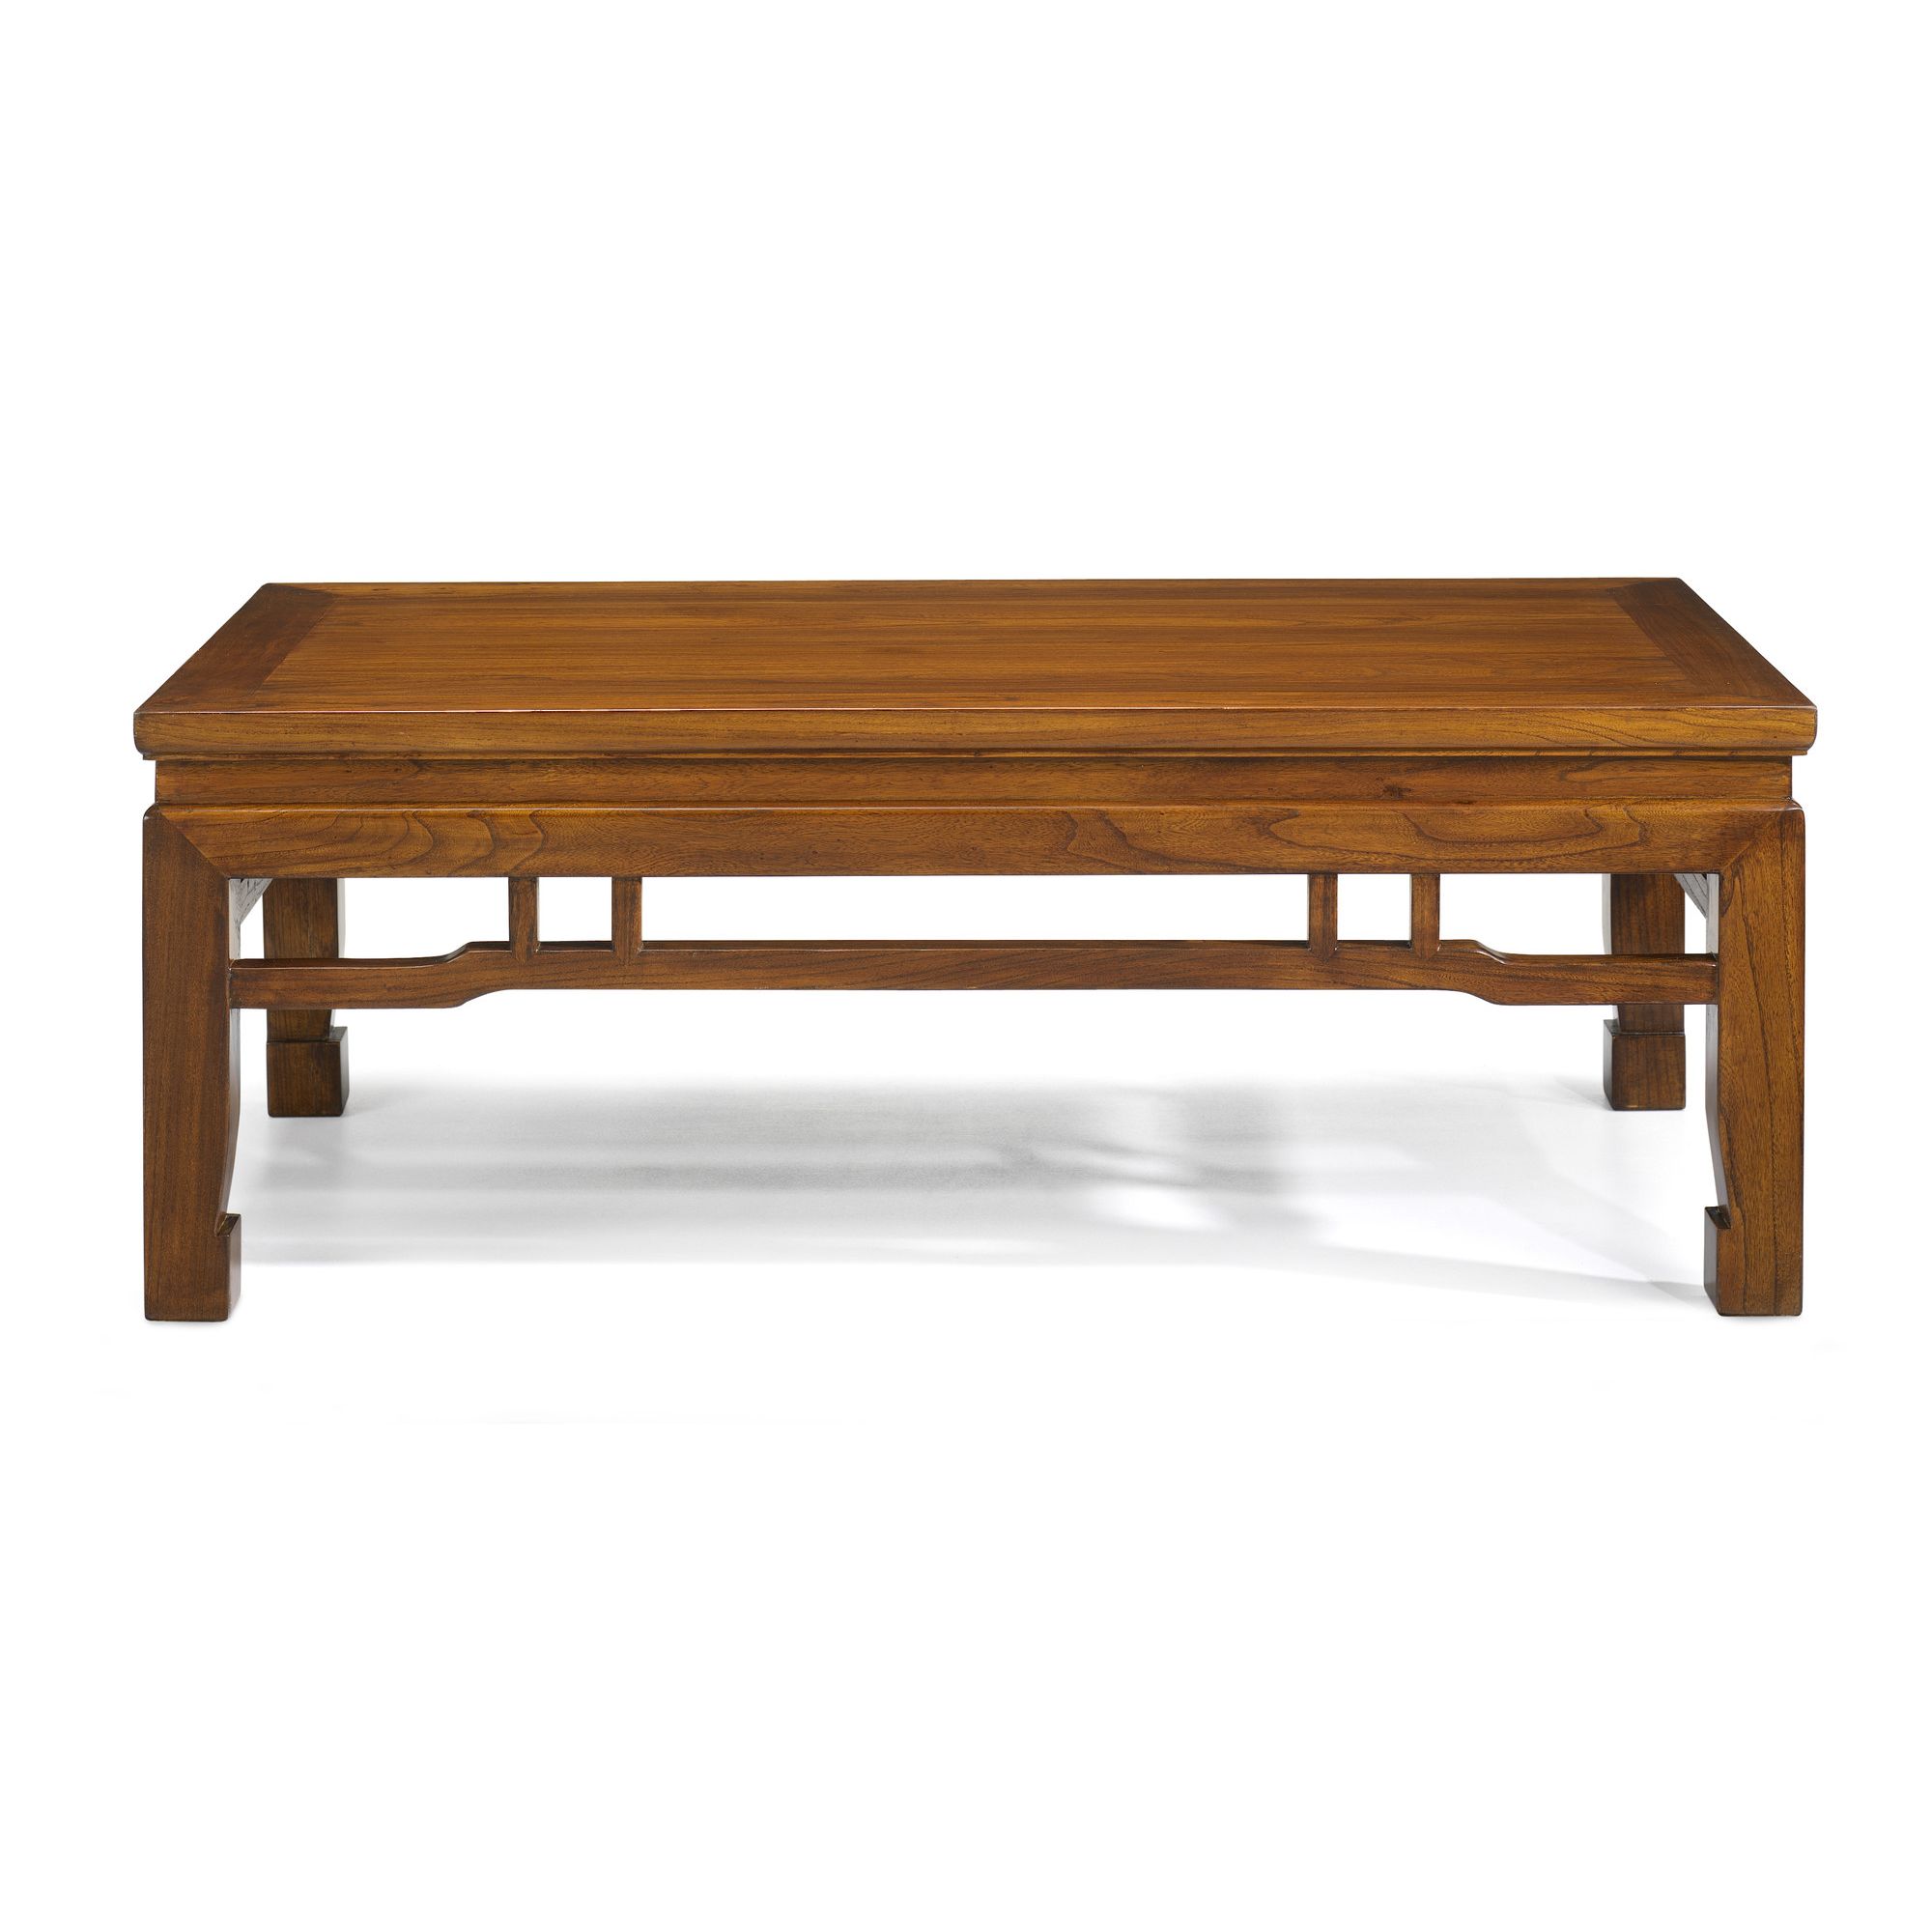 Shimu Chinese Classical Kang Style Coffee Table - Warm Elm at Tesco Direct